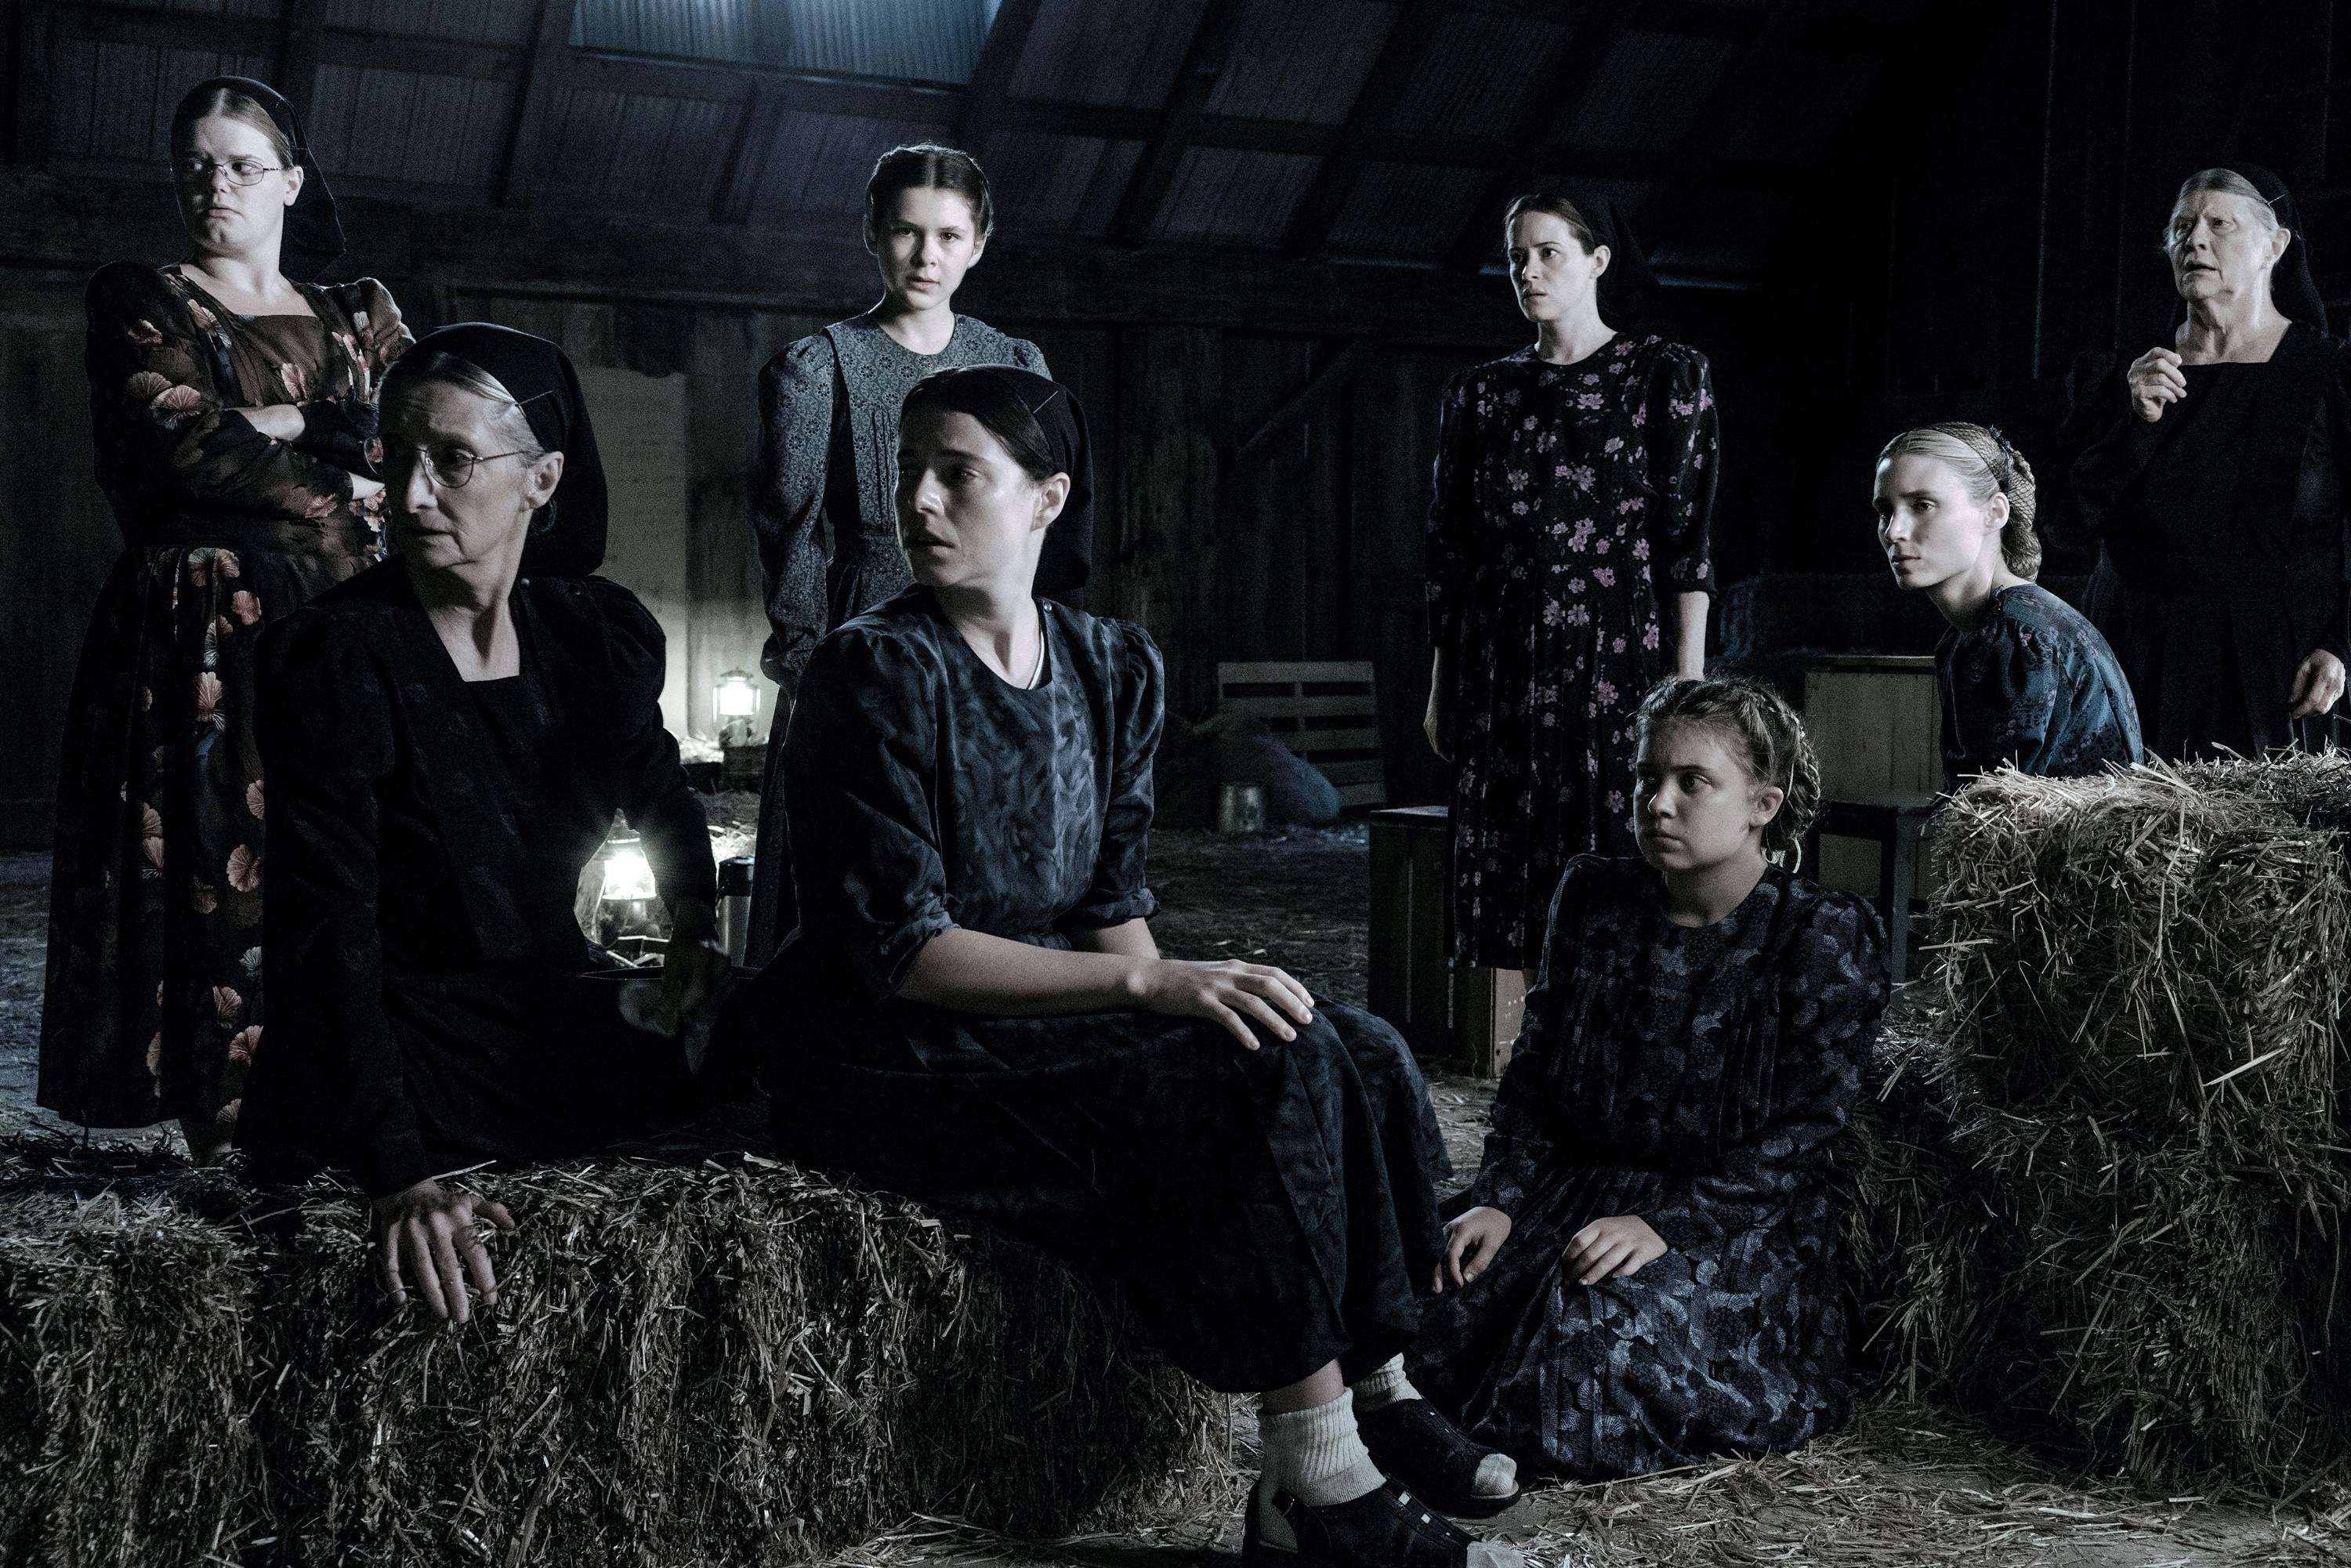 A group of women sit together in a barn